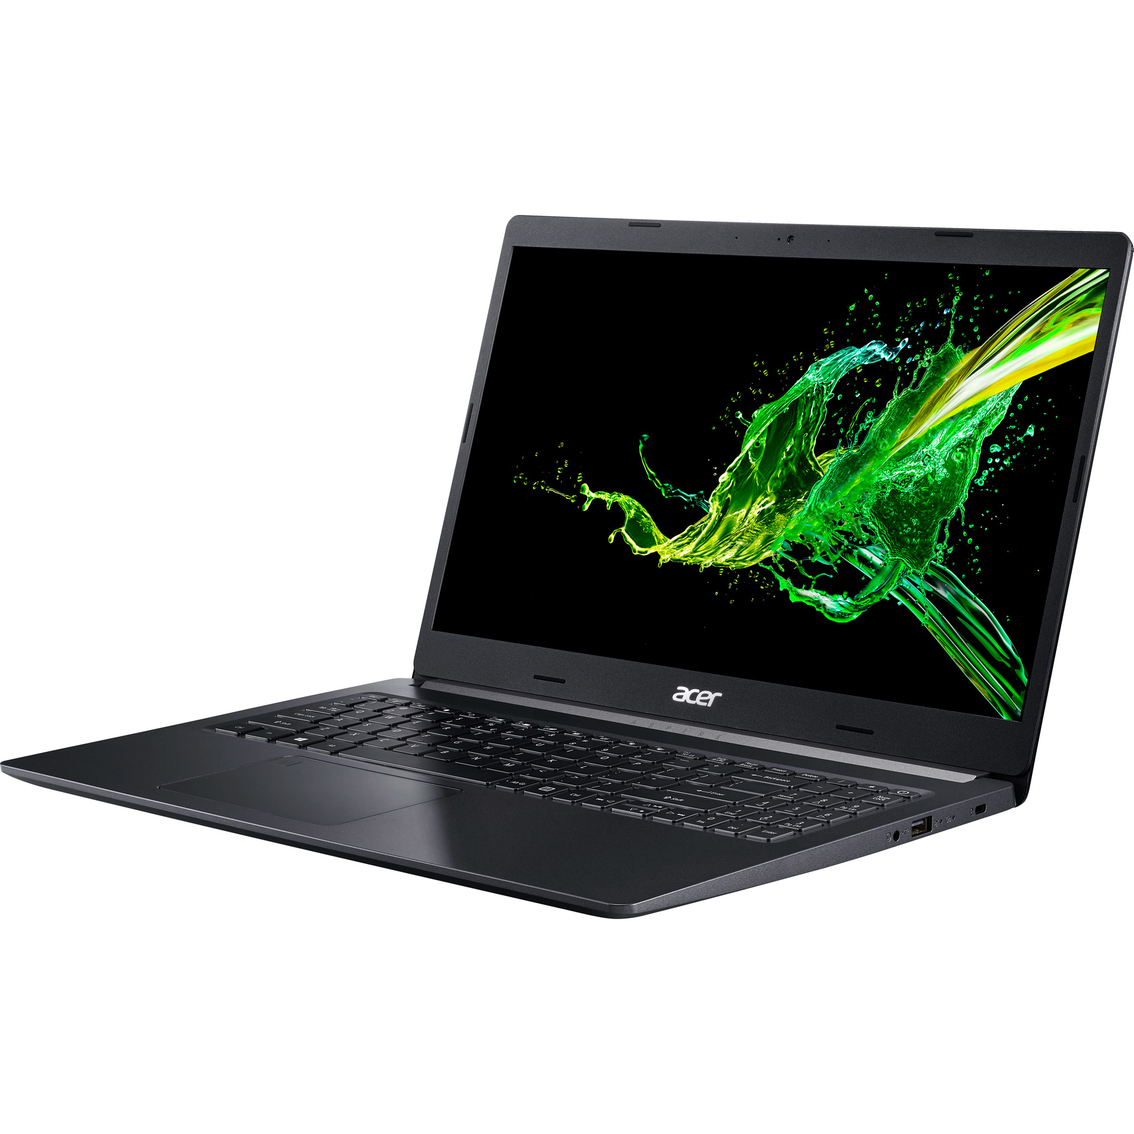 Acer Aspire 5 15.6 in. Intel Core i5 1GHz 8GB RAM 512GB SSD Touchscreen Notebook - Image 2 of 4